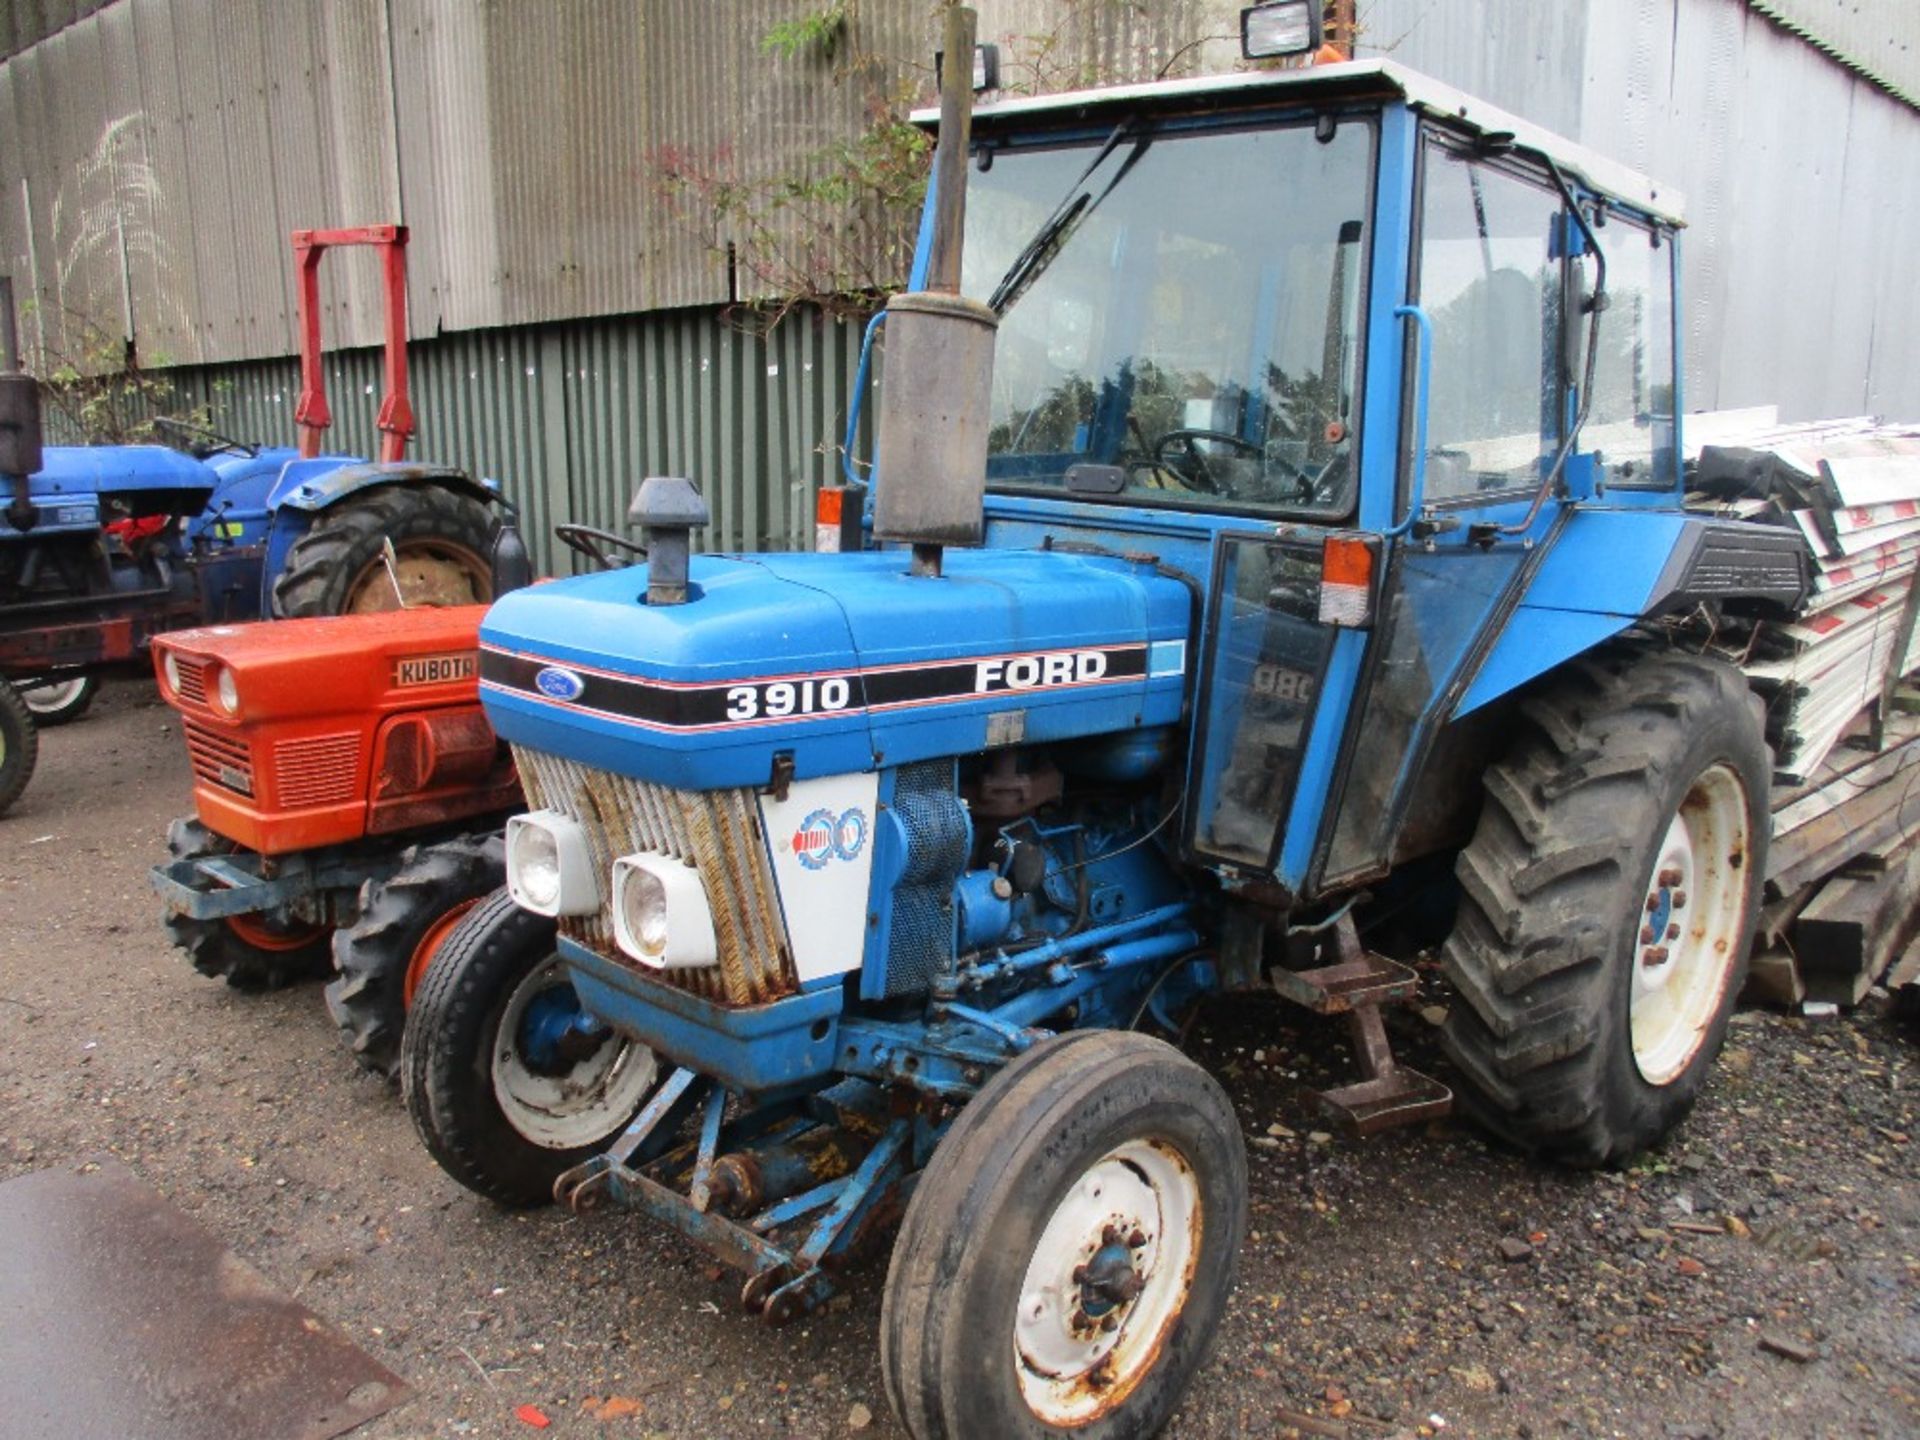 FORD 3910 AGRICULTURAL 2 WHEEL DRIVE TRACTOR.